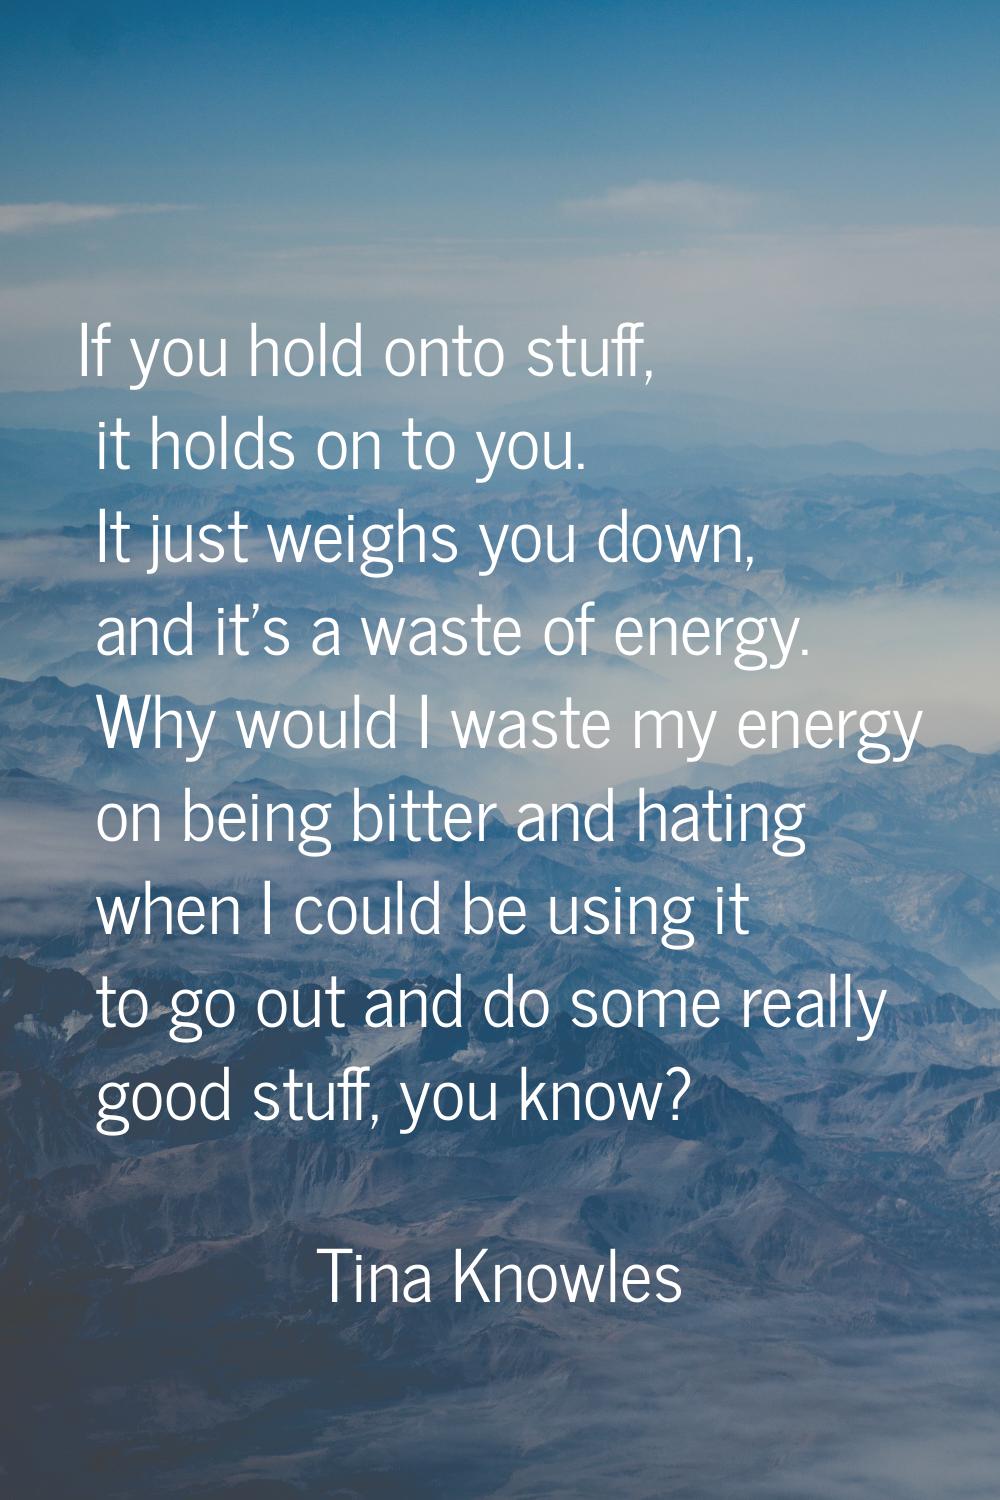 If you hold onto stuff, it holds on to you. It just weighs you down, and it's a waste of energy. Wh